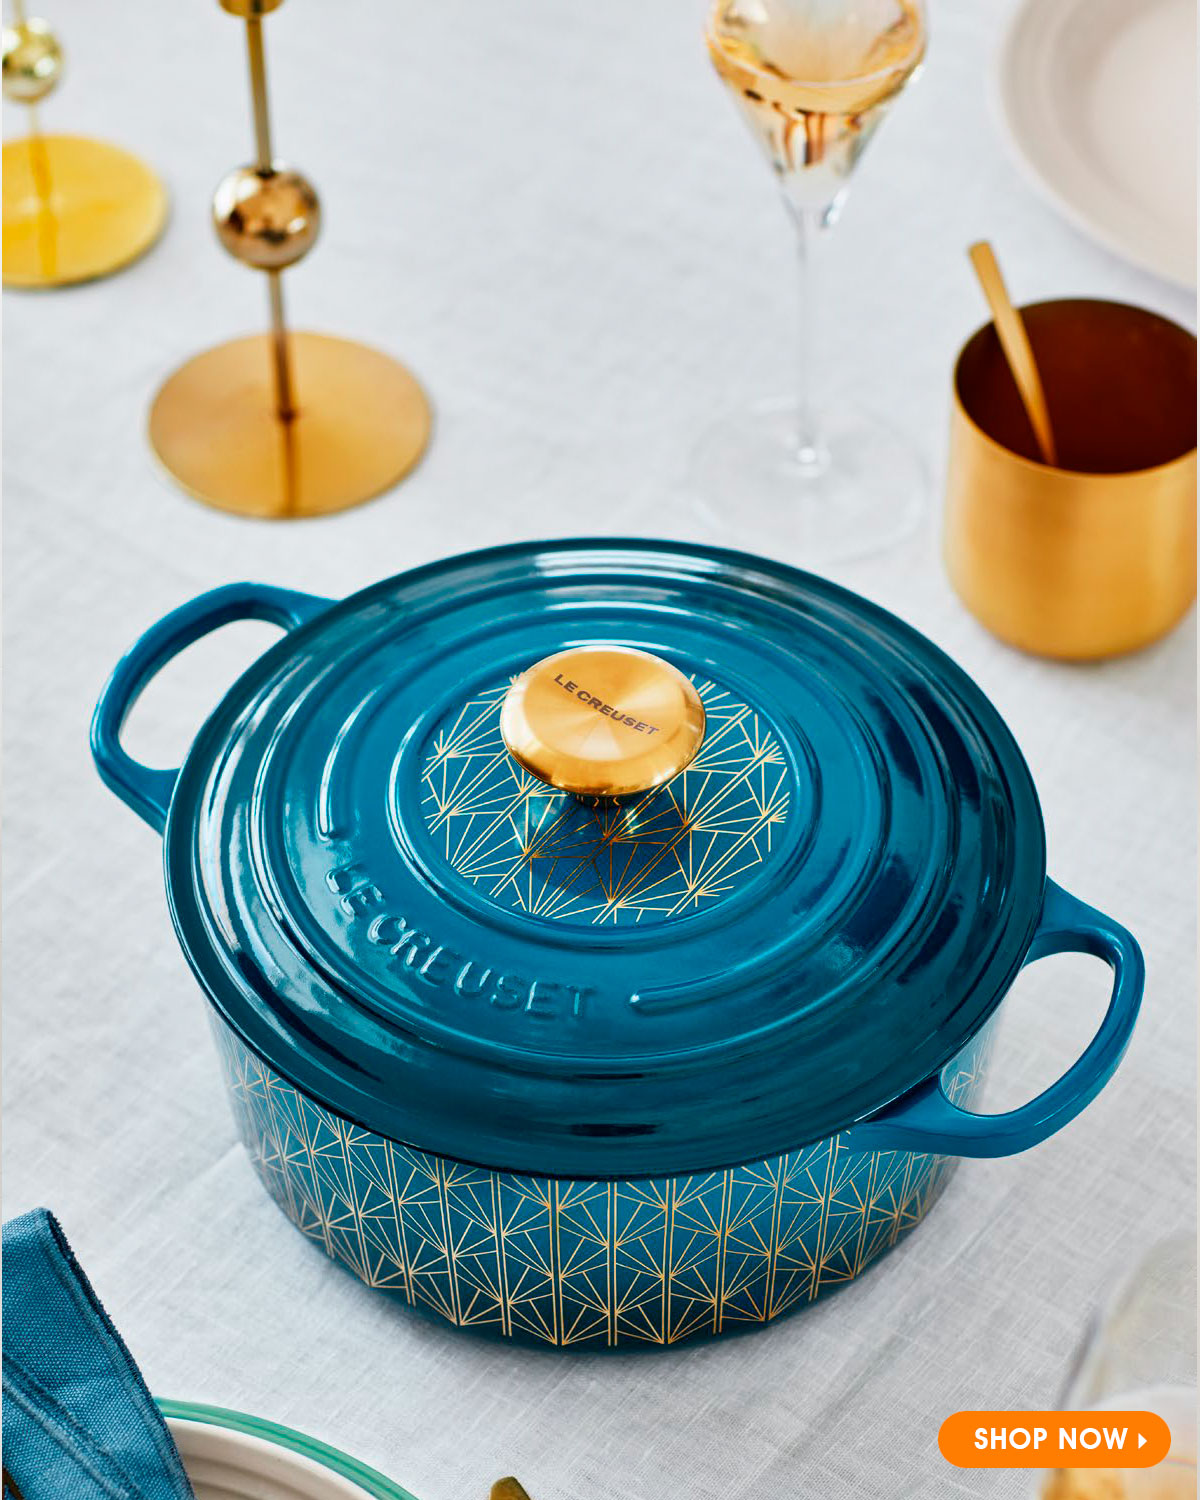 Le Limited For the Le Creuset Lover Who Has Everything!